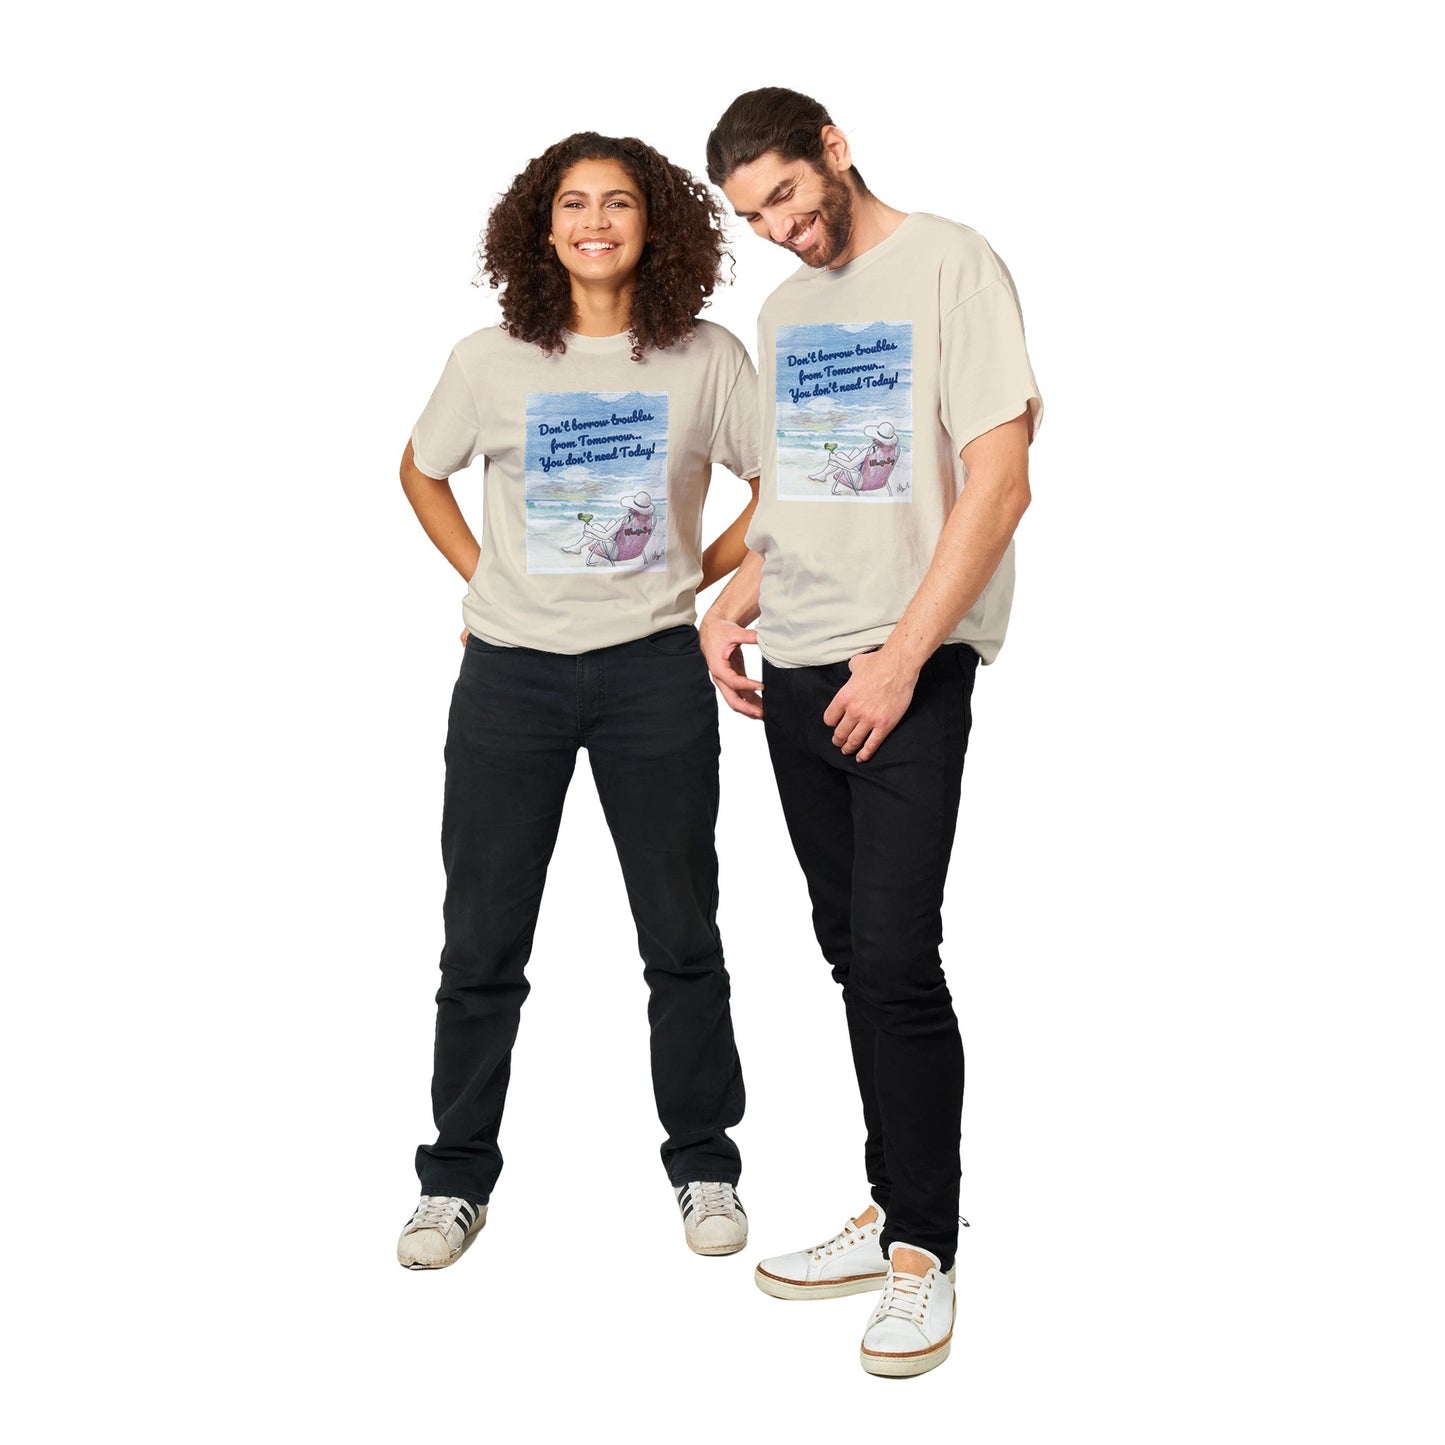 A natural heavyweight Unisex Crewneck t-shirt with original artwork and motto Don’t borrow troubles from Tomorrow… You don’t need Today! on front with WhatYa Say logo on image from WhatYa Say Apparel worn by Happy woman and man couple standing side by side.